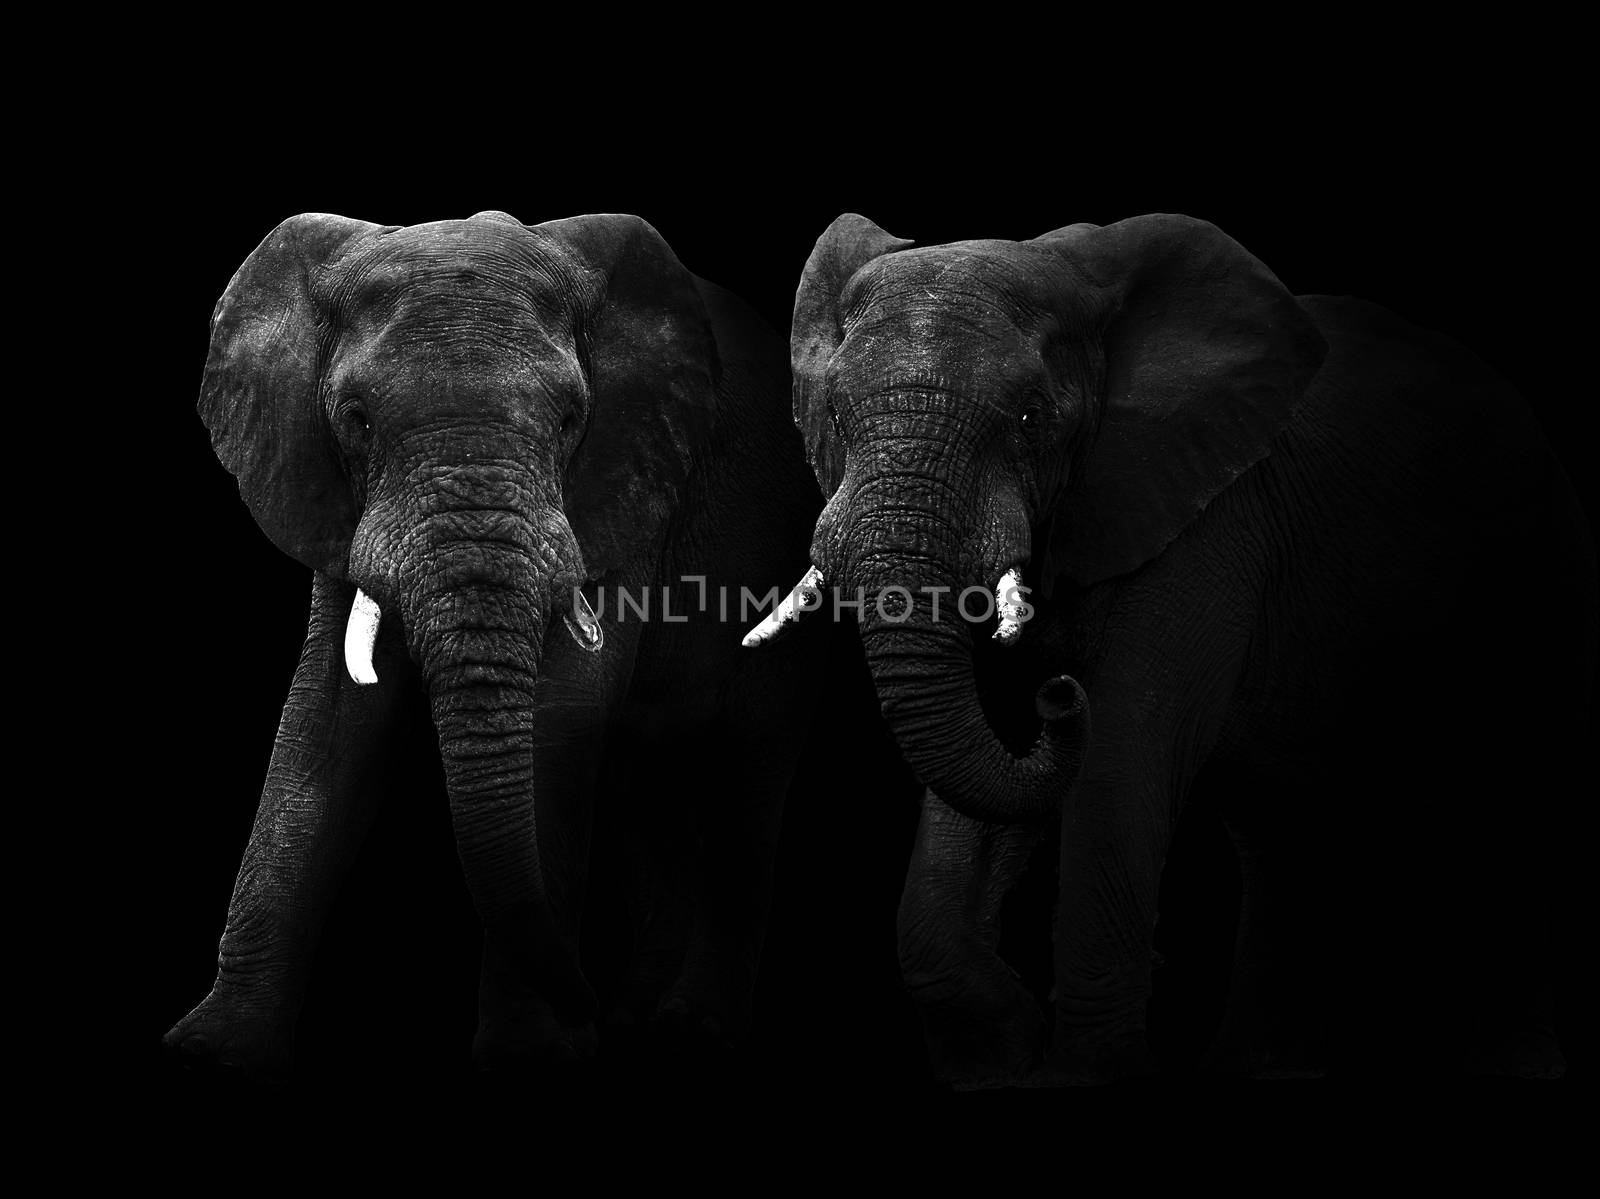 Abstract black and white image of two African elephant bulls walking out of the dark.